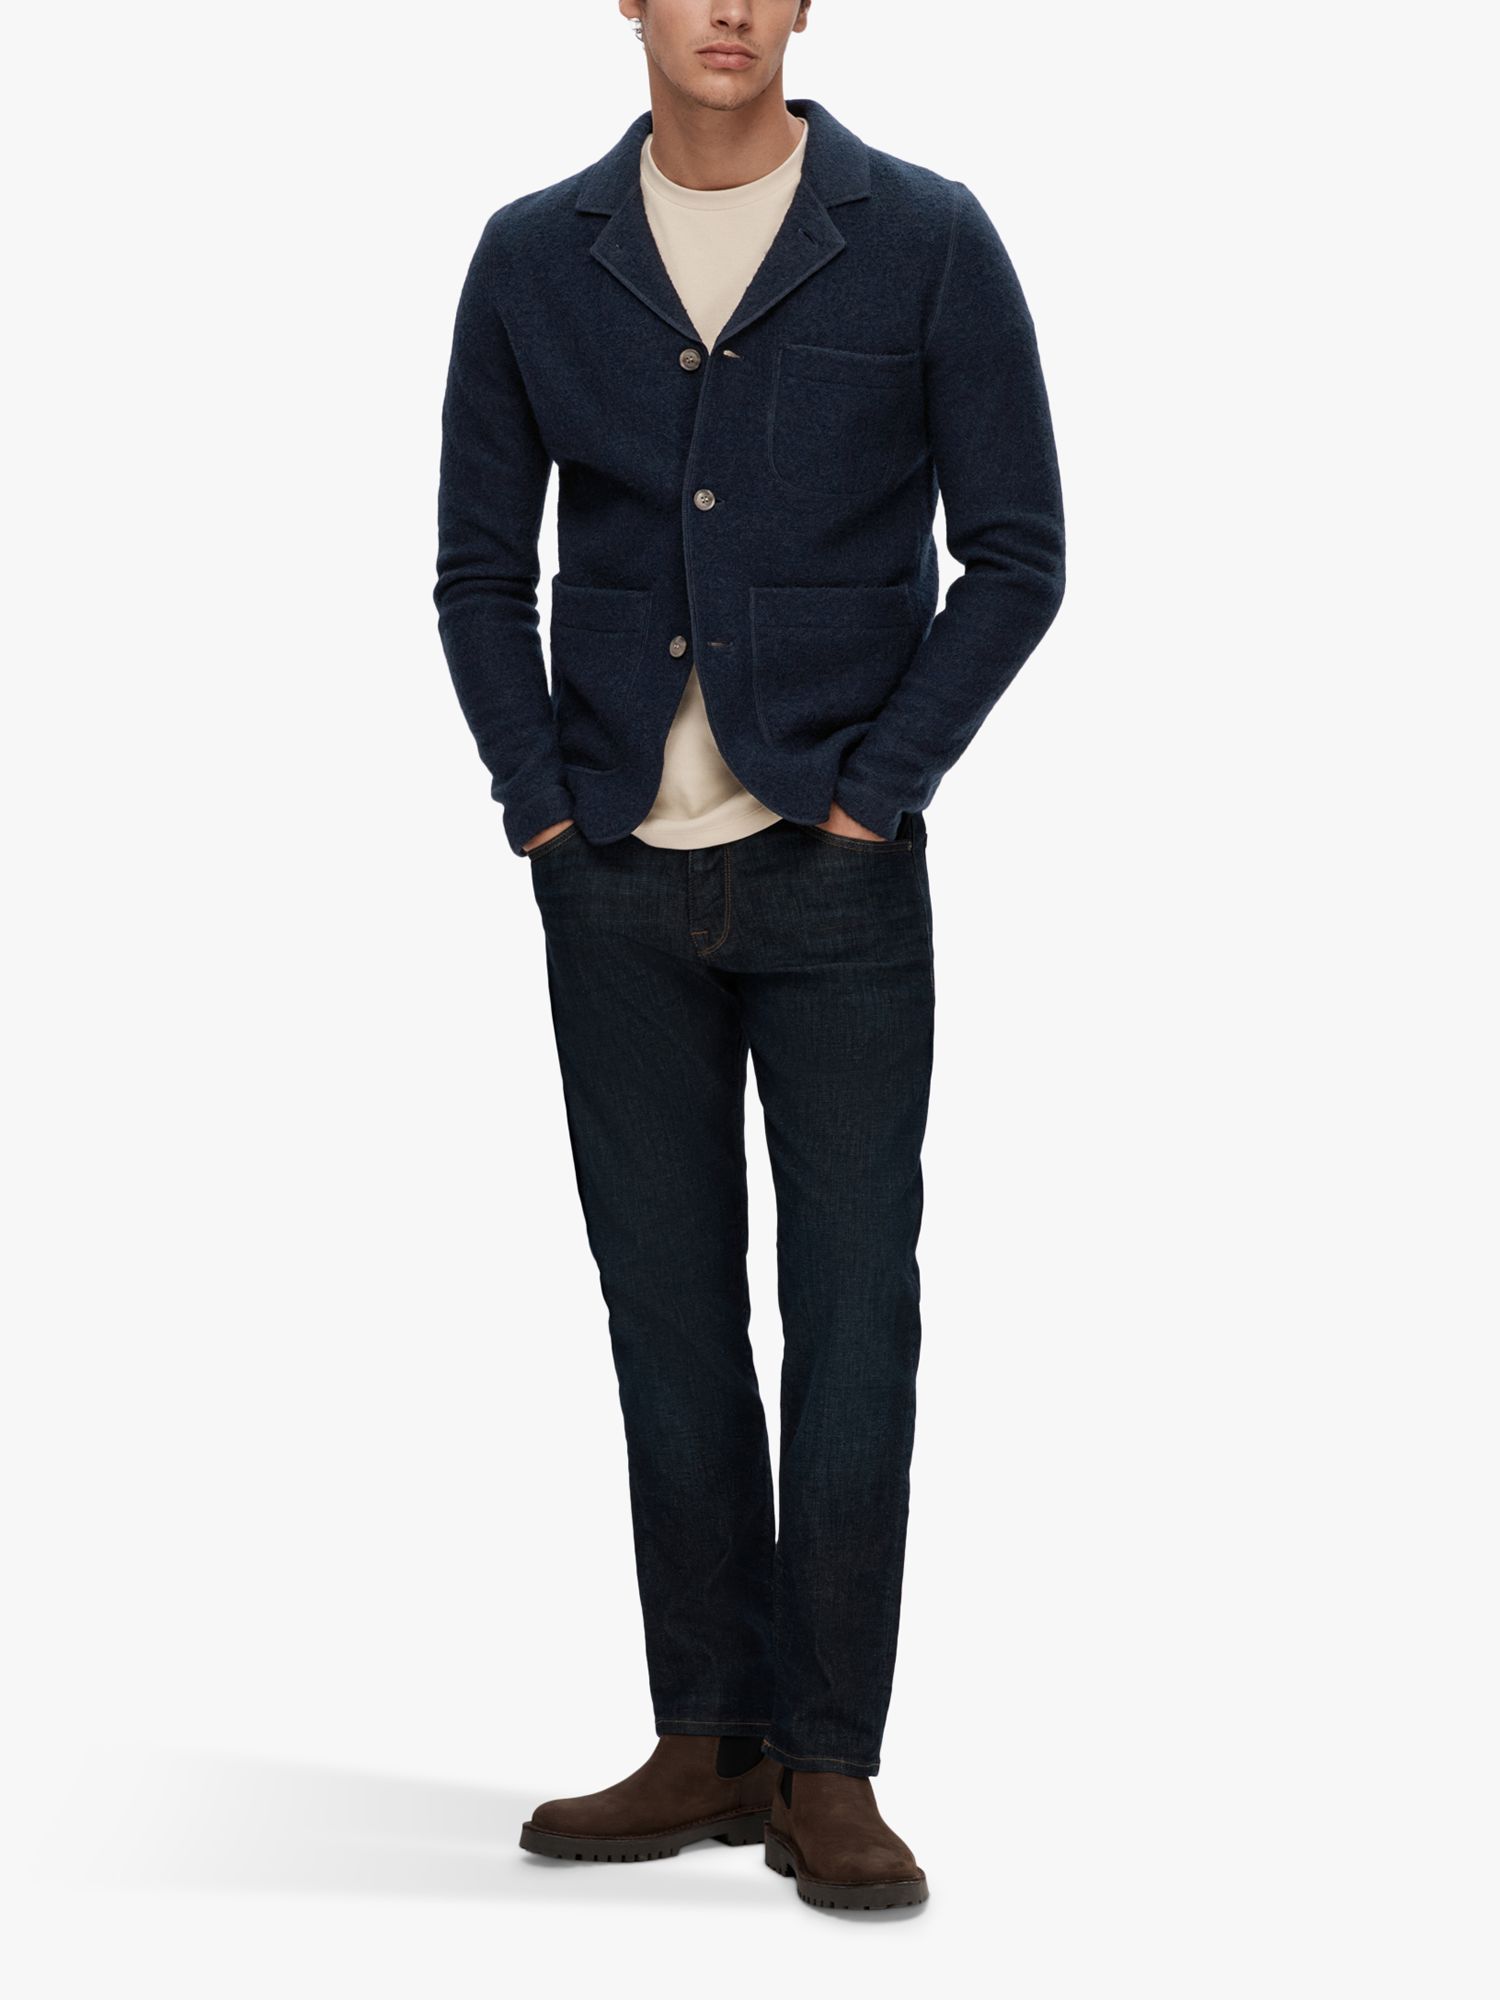 Buy SELECTED HOMME Nealy Knit Blazer Cardigan, Sky Captain Online at johnlewis.com